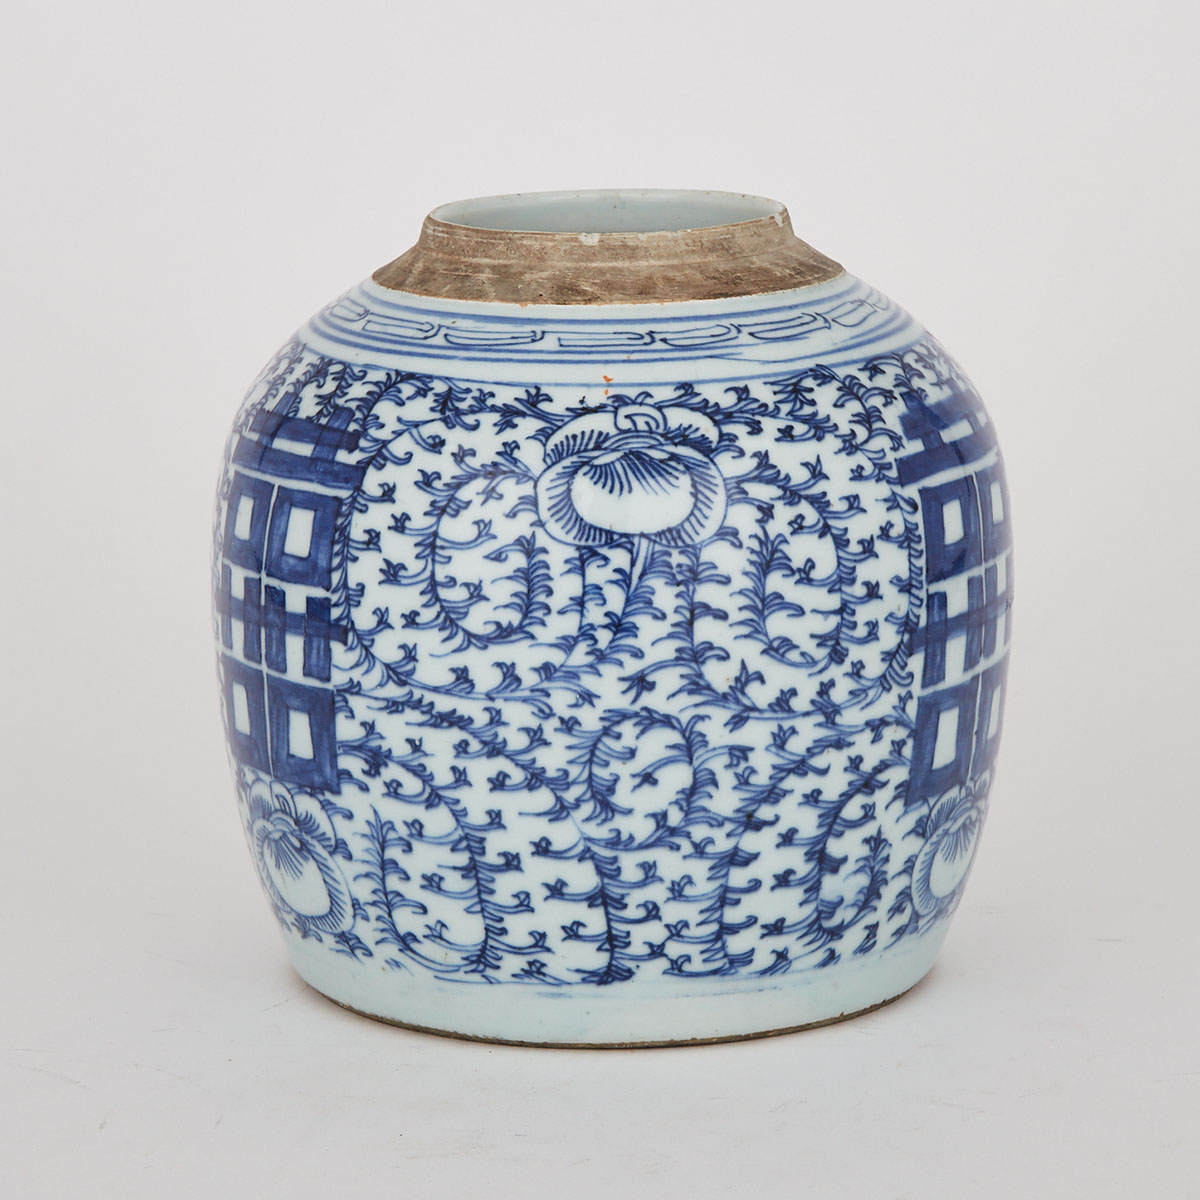 A Blue and White ‘Double Happiness’ Ginger Jar, 19th Century